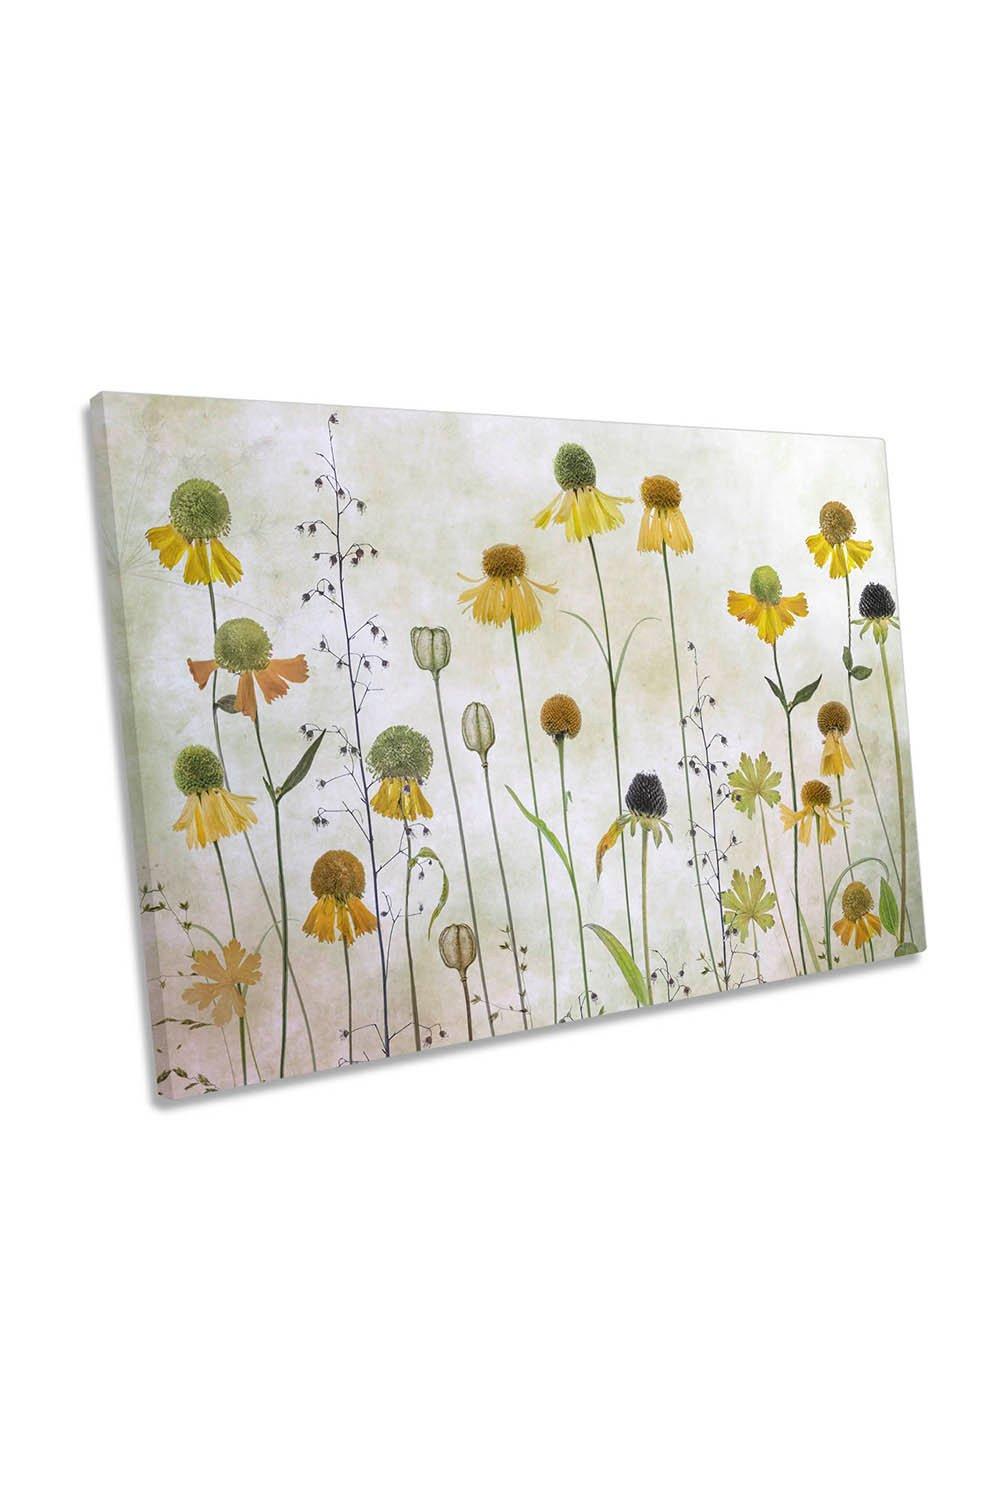 Helenium Summer Flowers Yellow Canvas Wall Art Picture Print